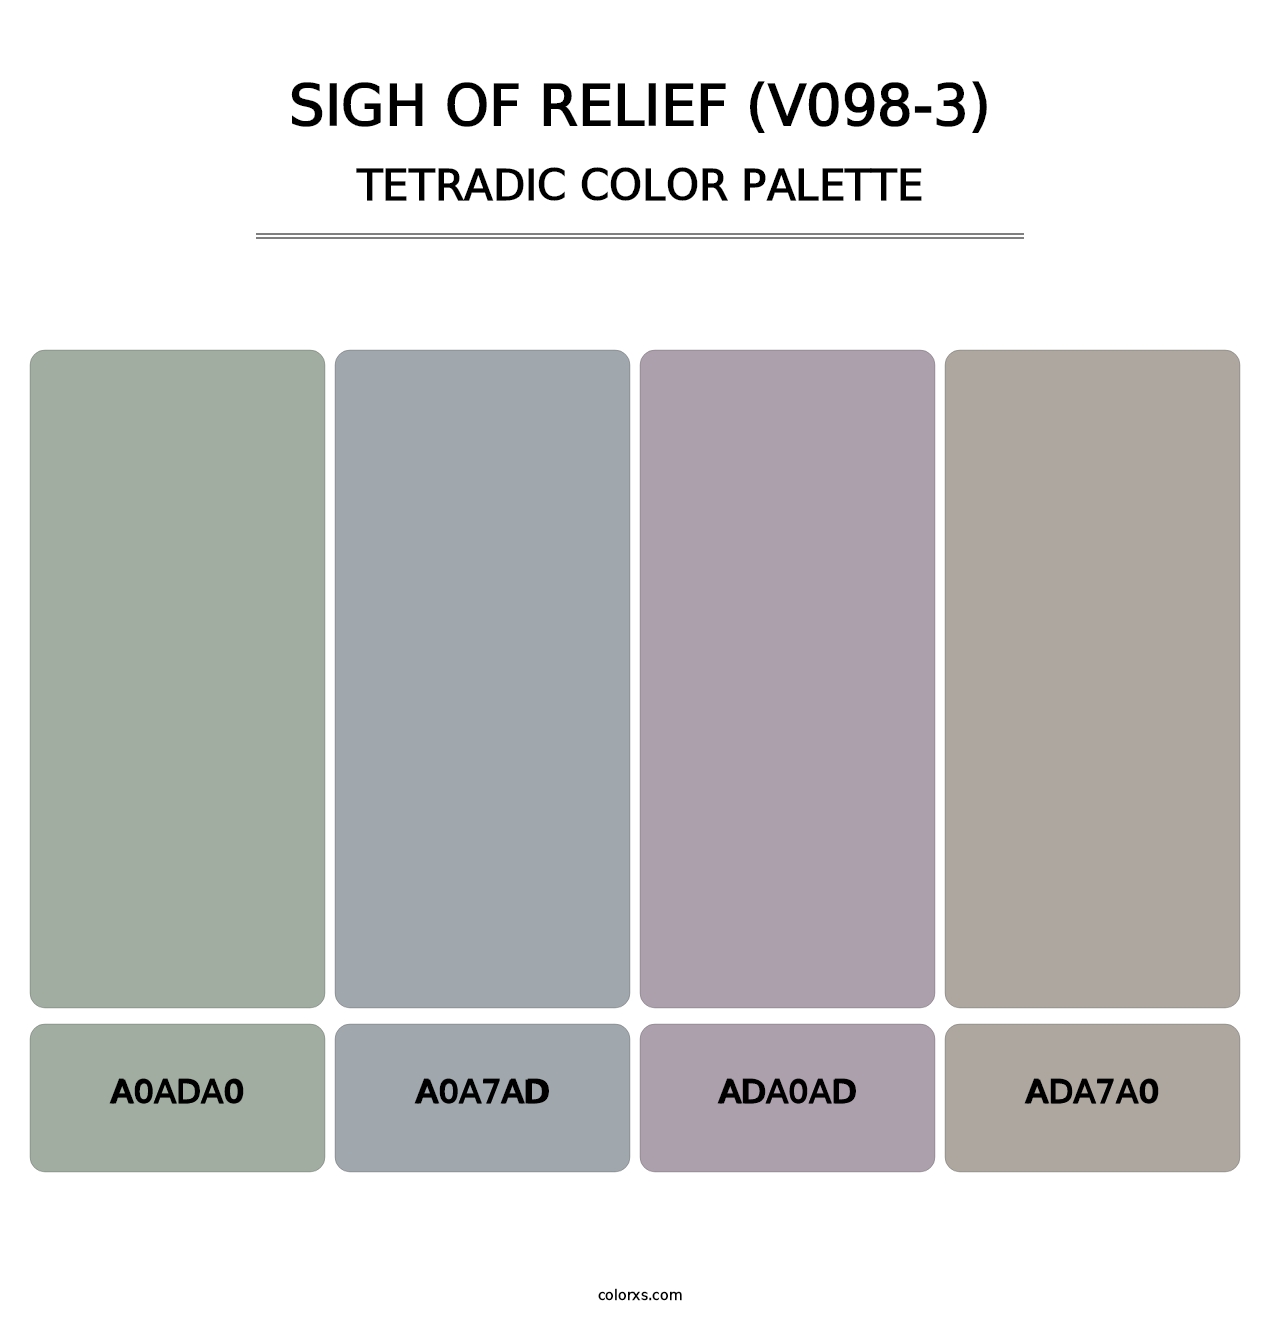 Sigh of Relief (V098-3) - Tetradic Color Palette